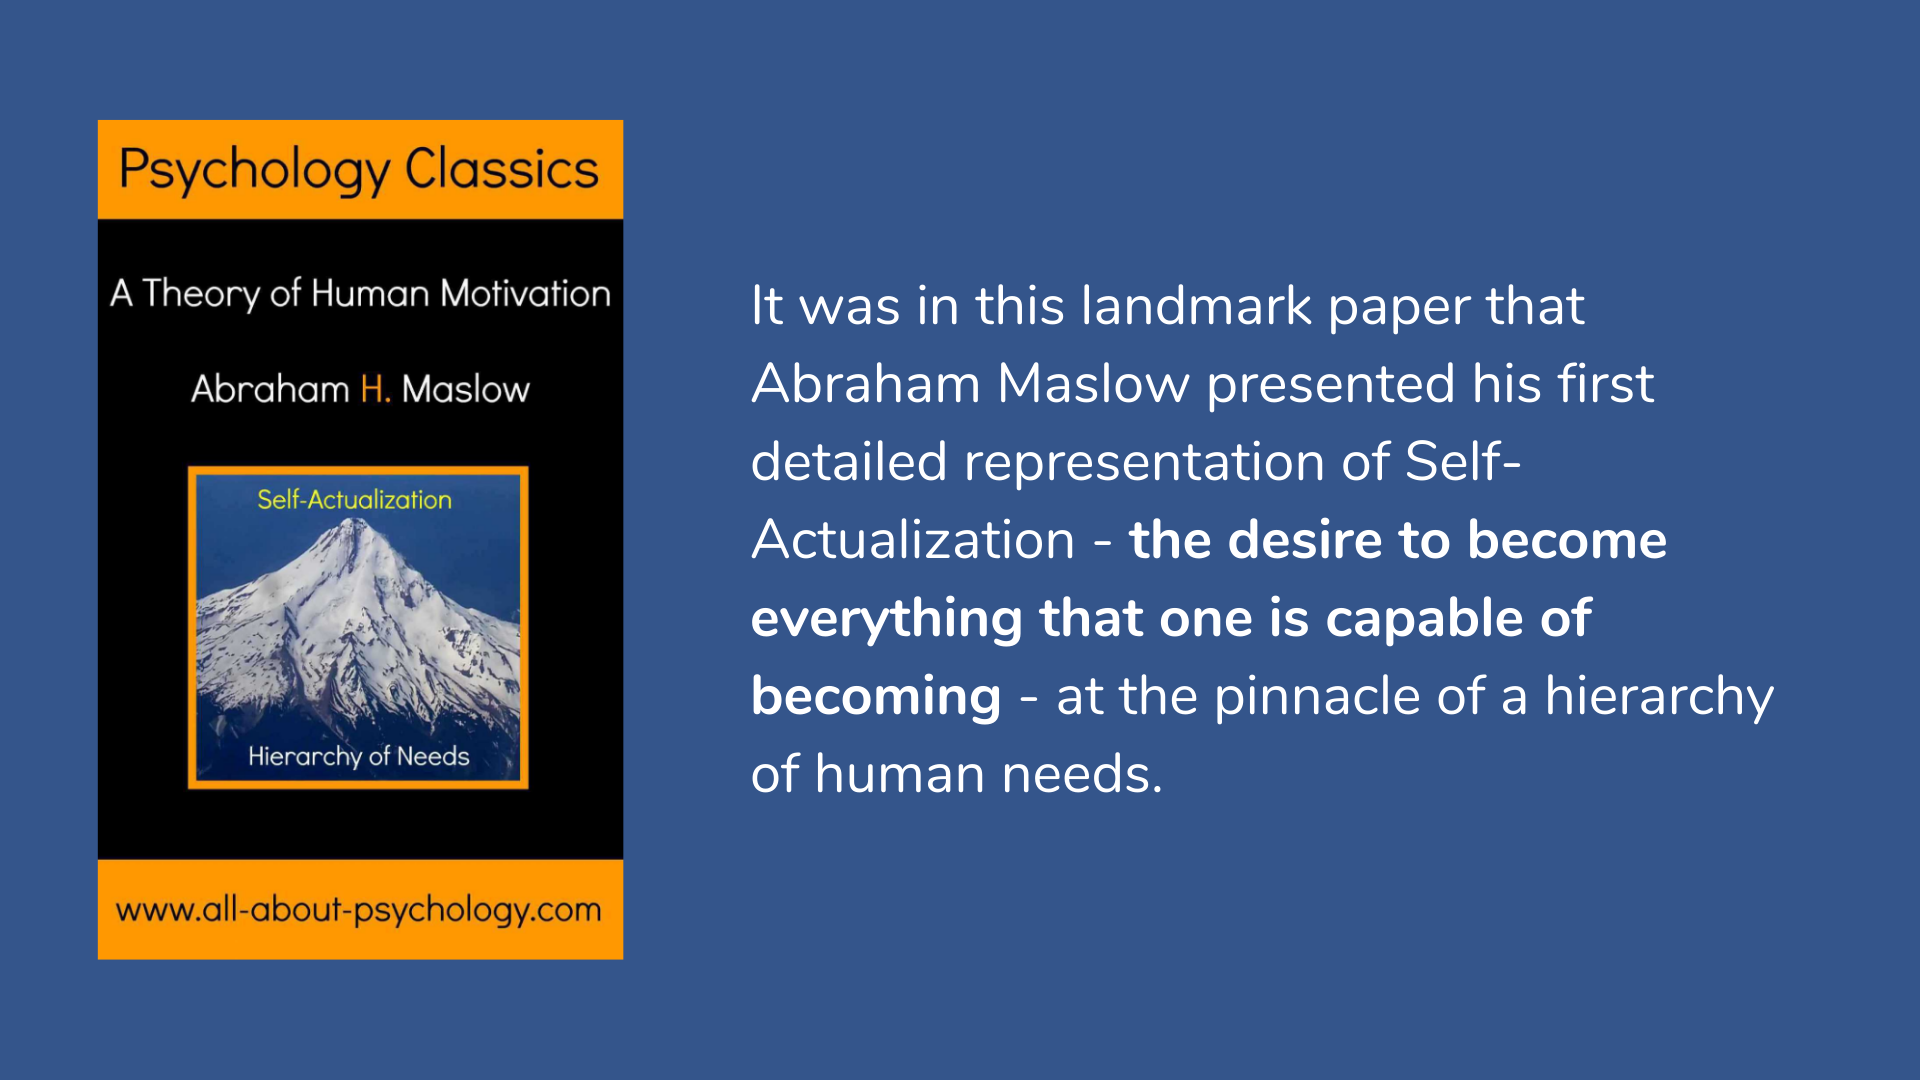 Hierarchy of Needs: A Theory of Human Motivation by Abraham Maslow Book Cover and Description